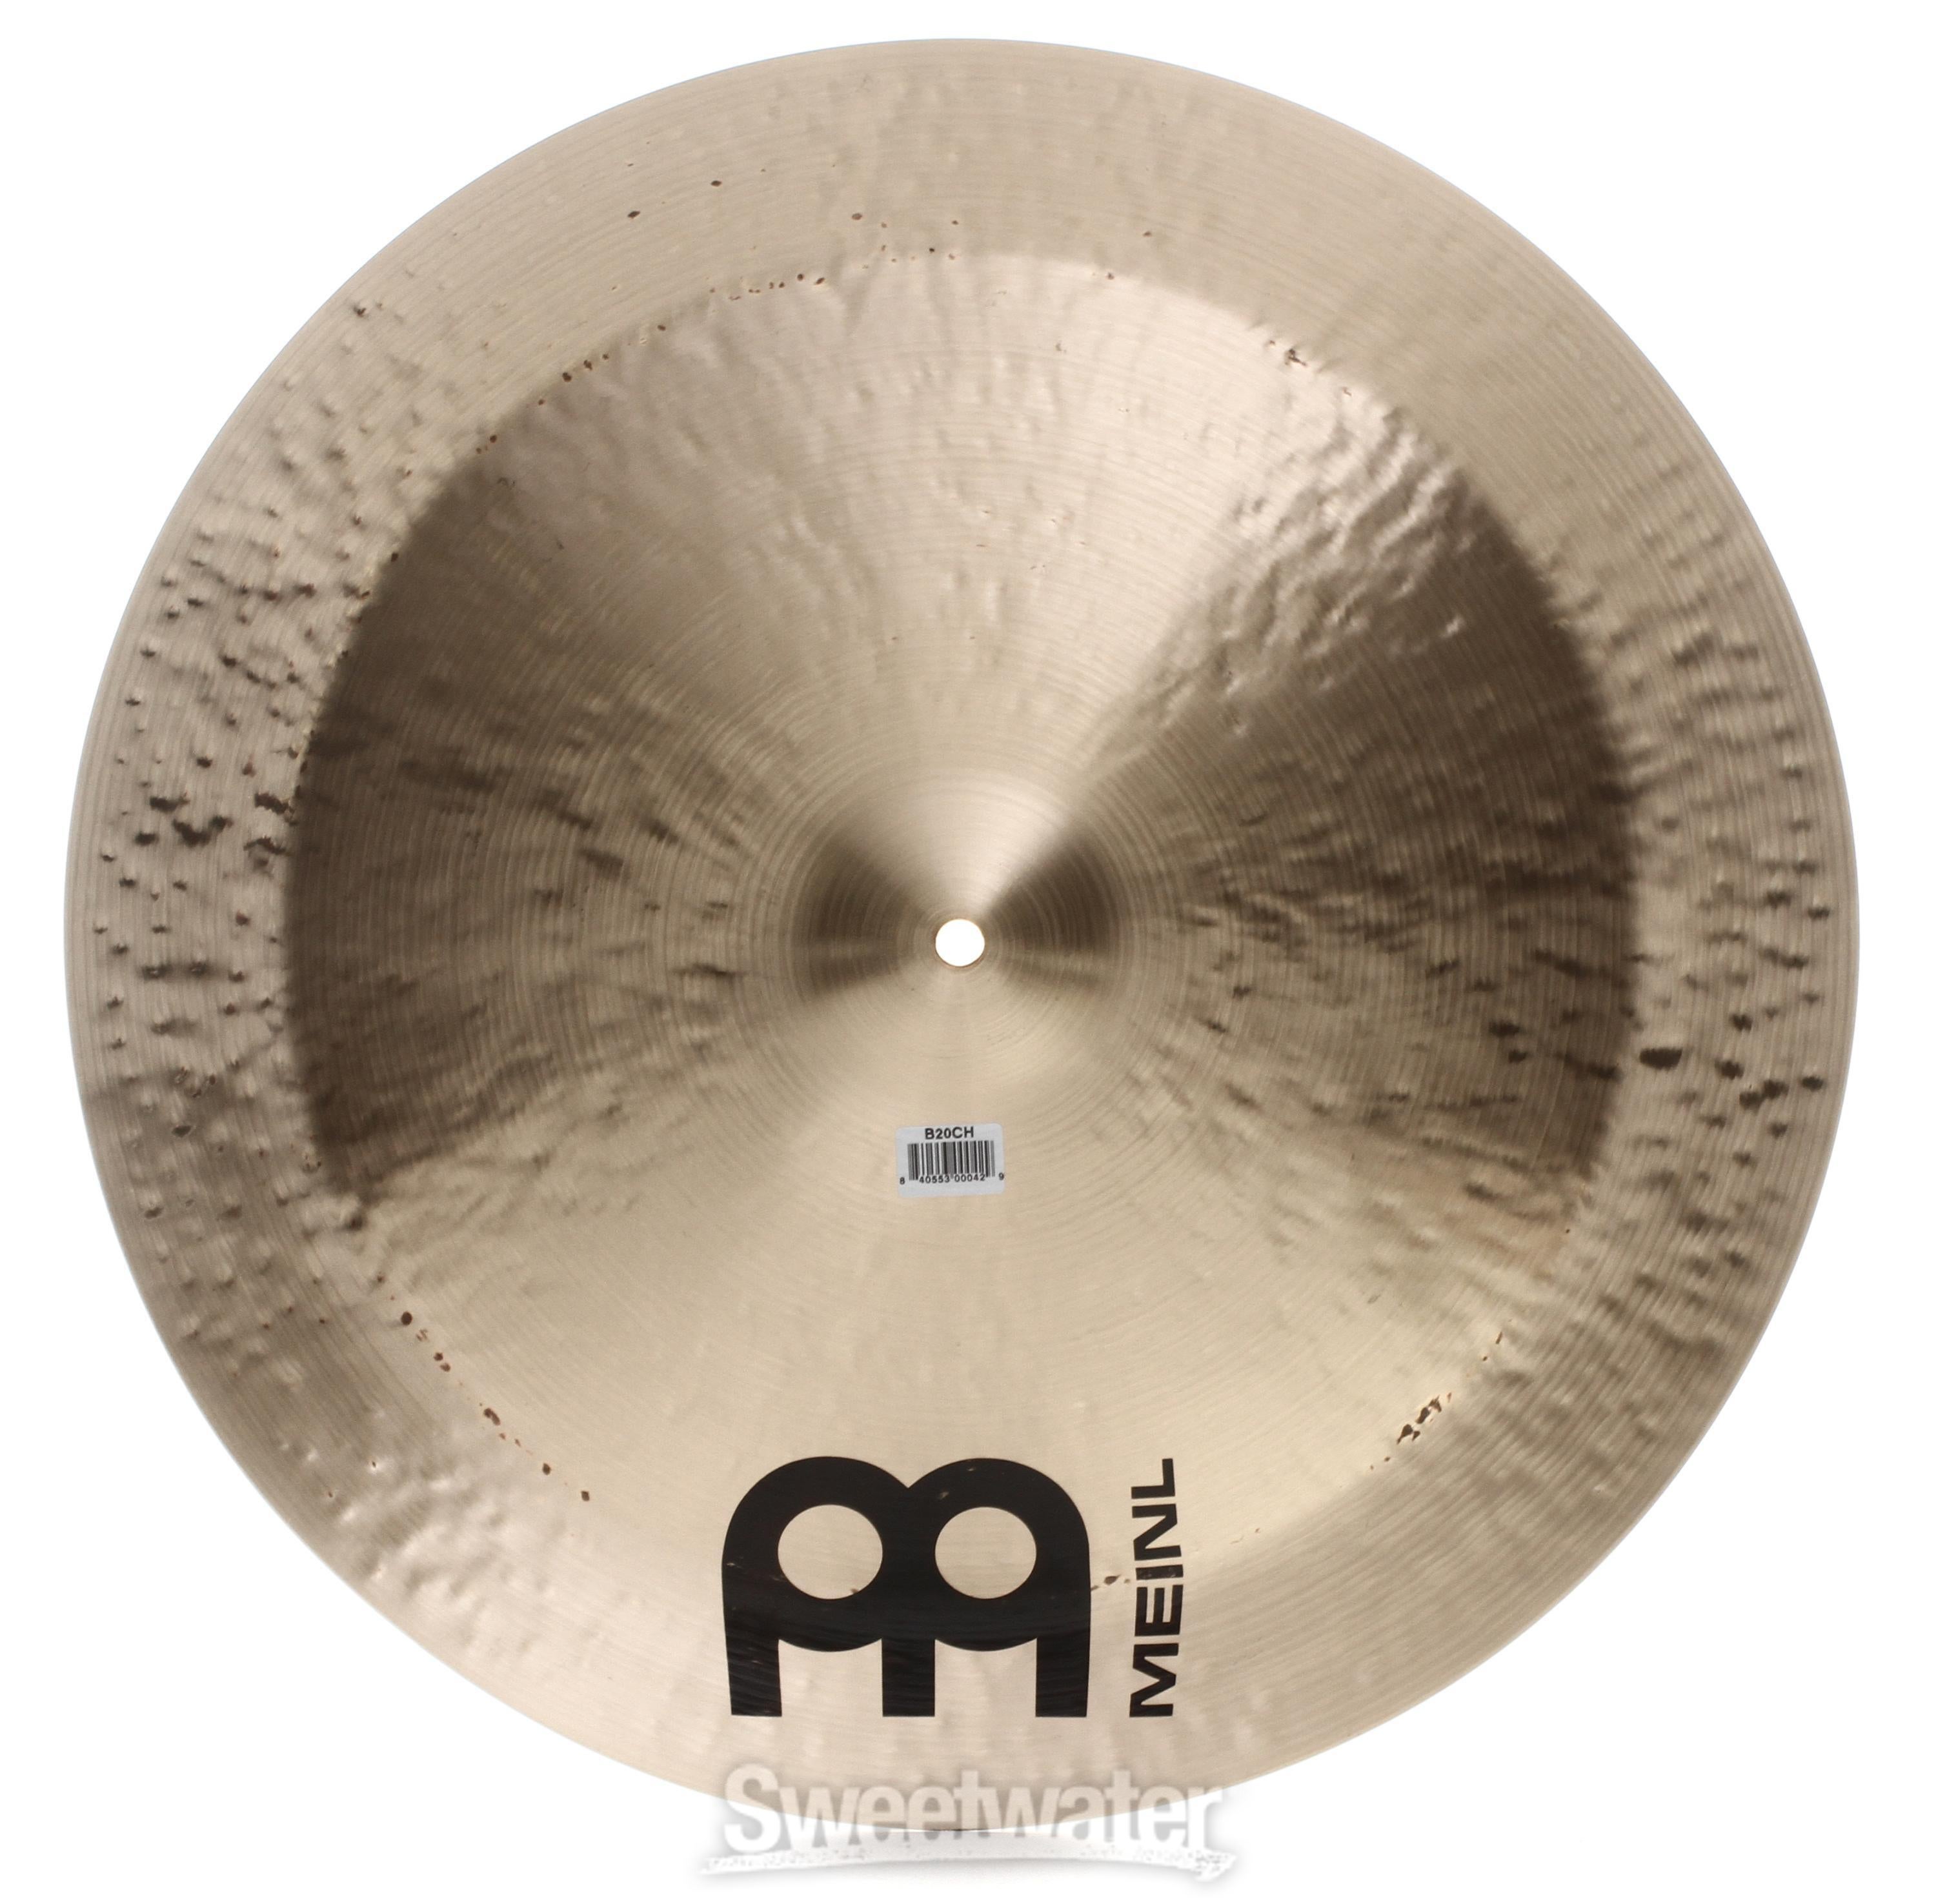 Meinl Cymbals 20-inch Byzance Traditional China Cymbal